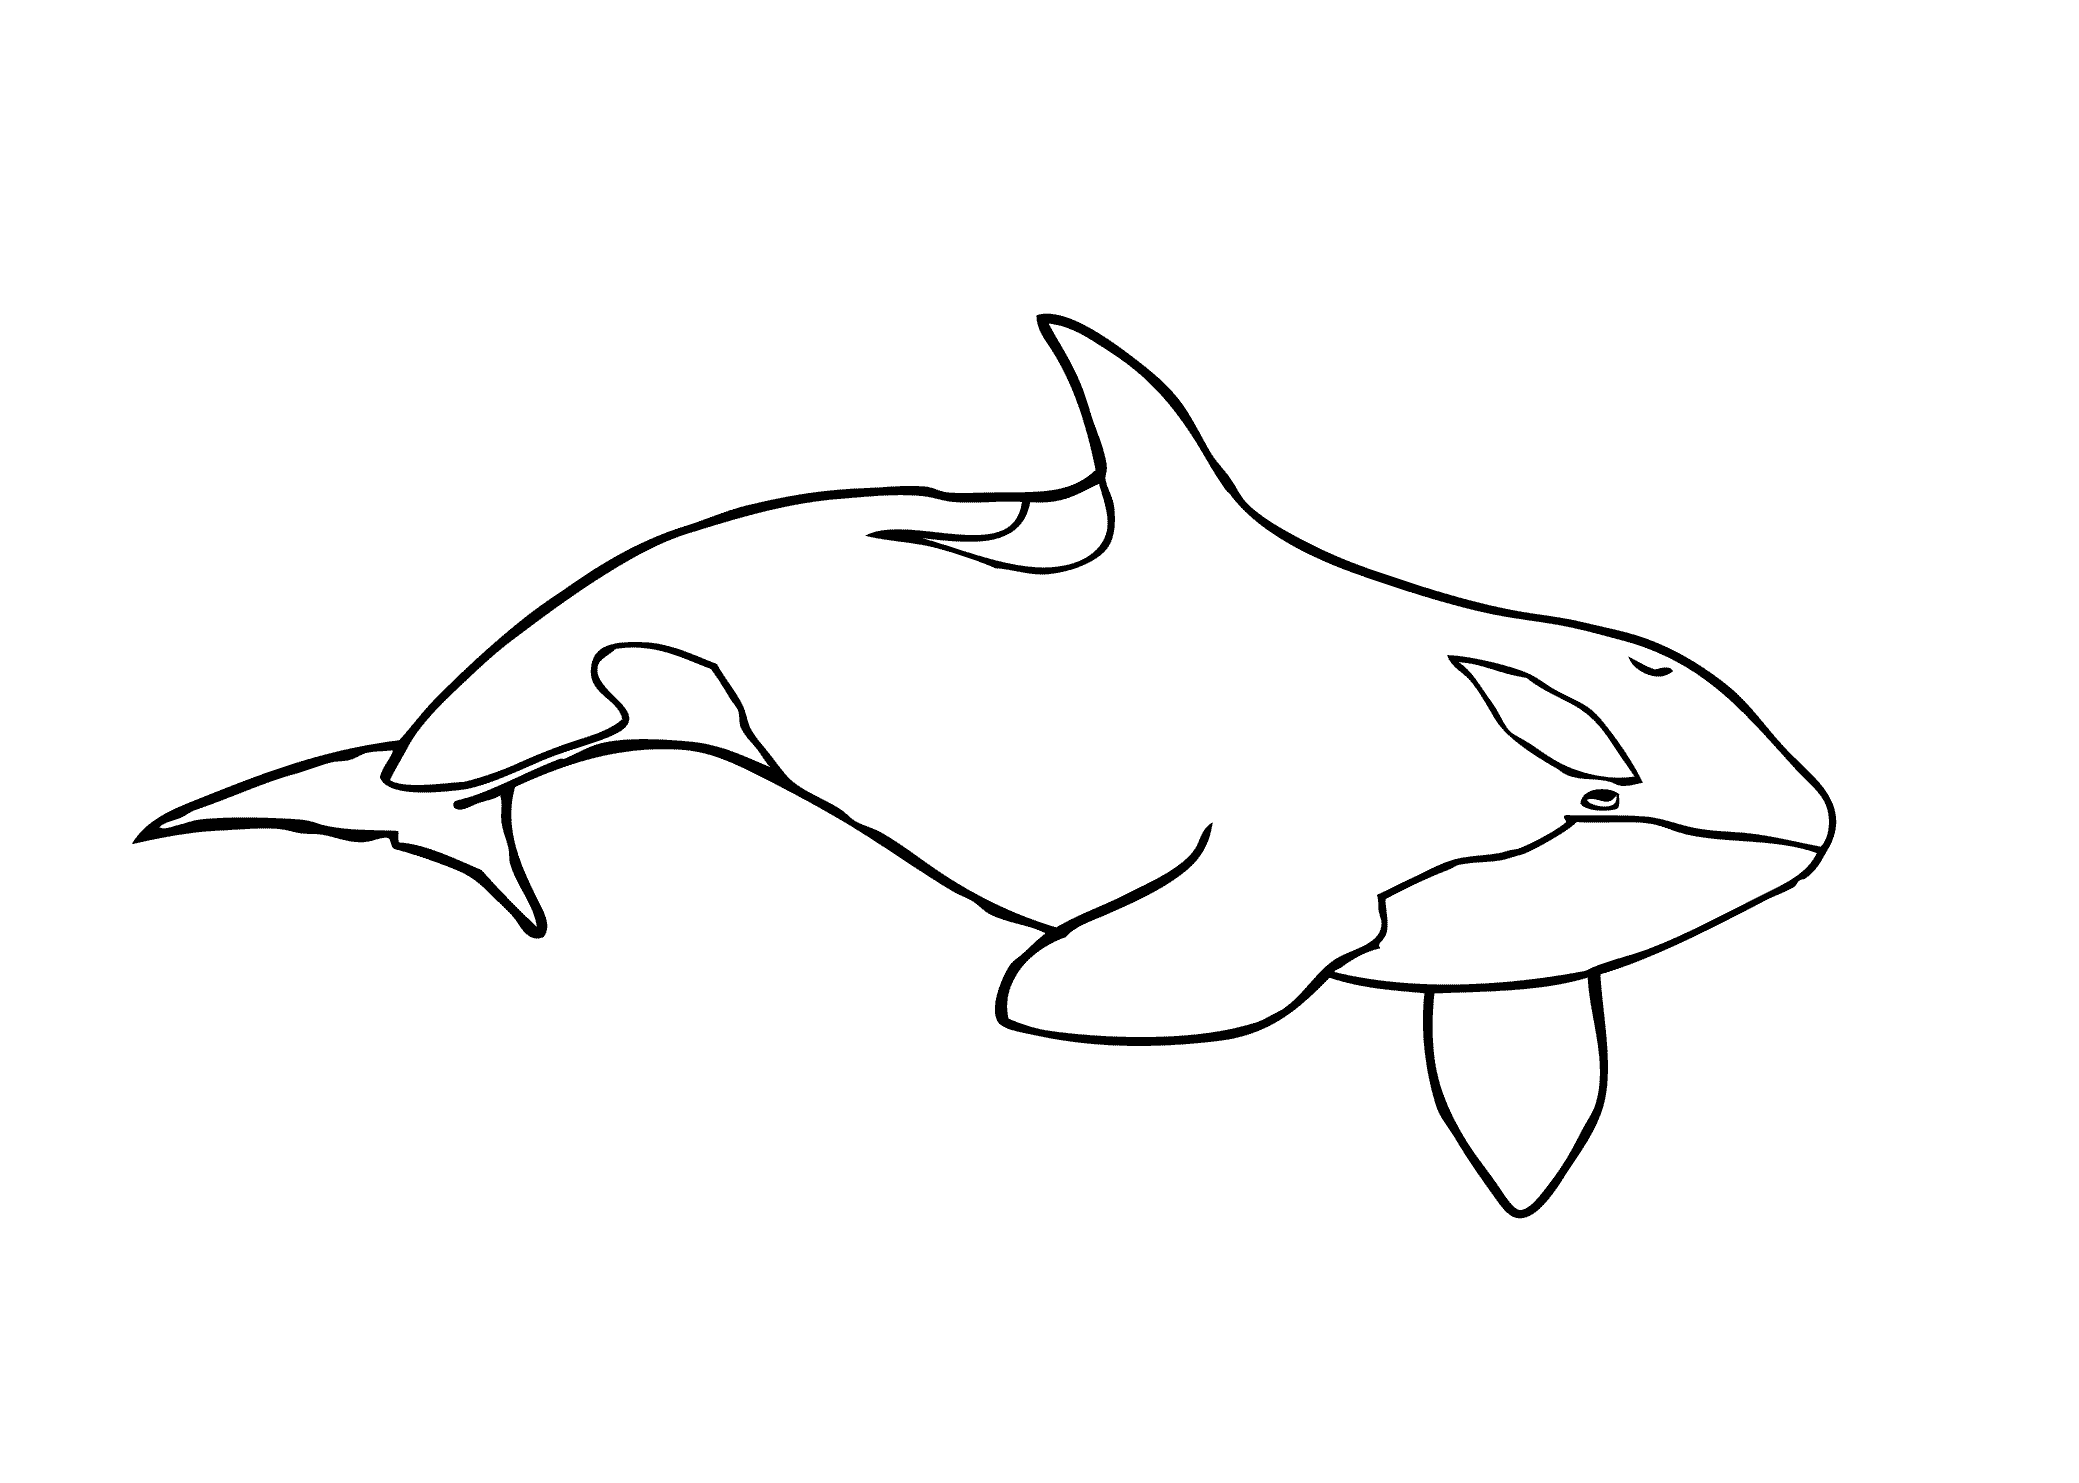 Orca Whale coloring page